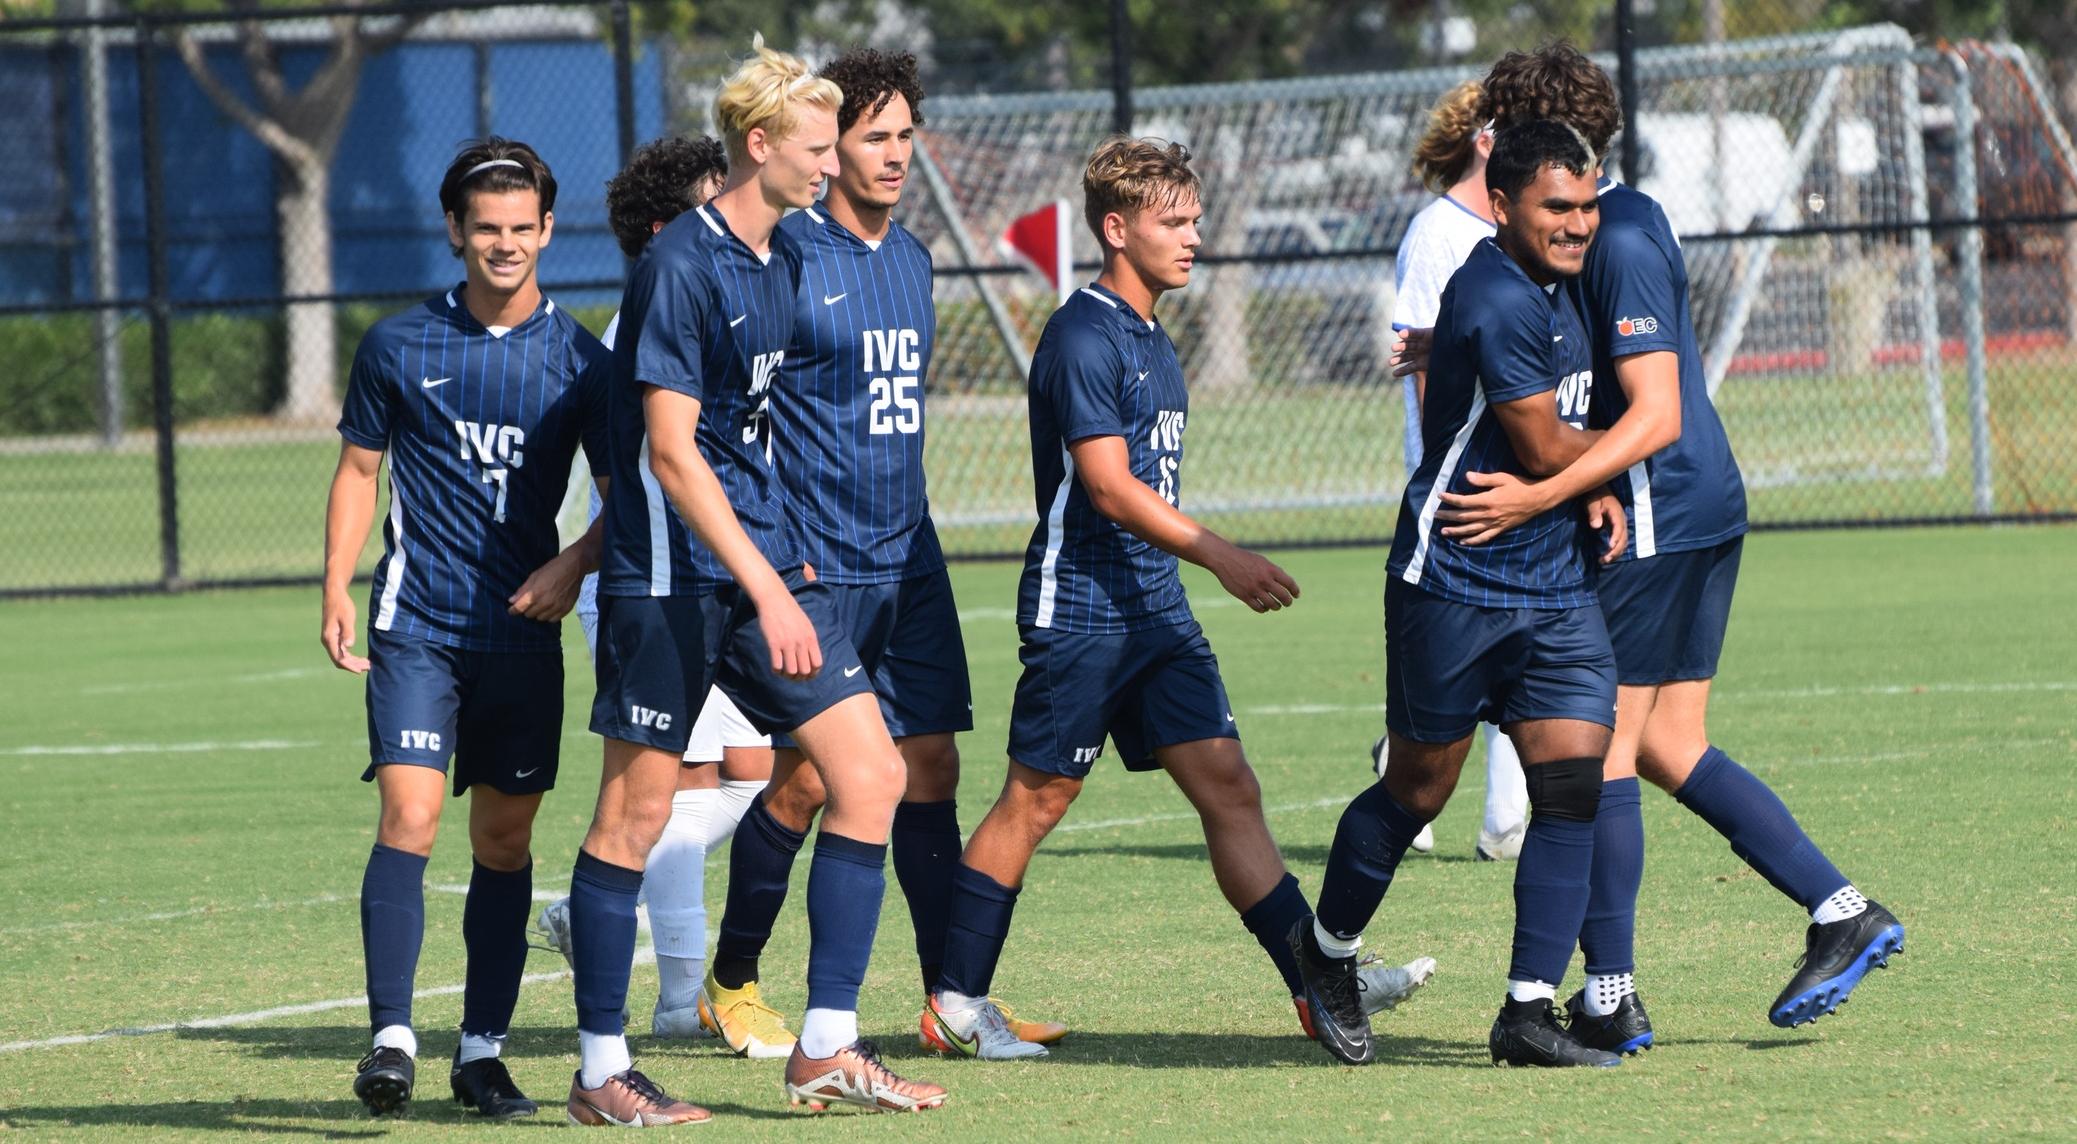 Men's soccer team scores early and earns 3-1 win over Mesa